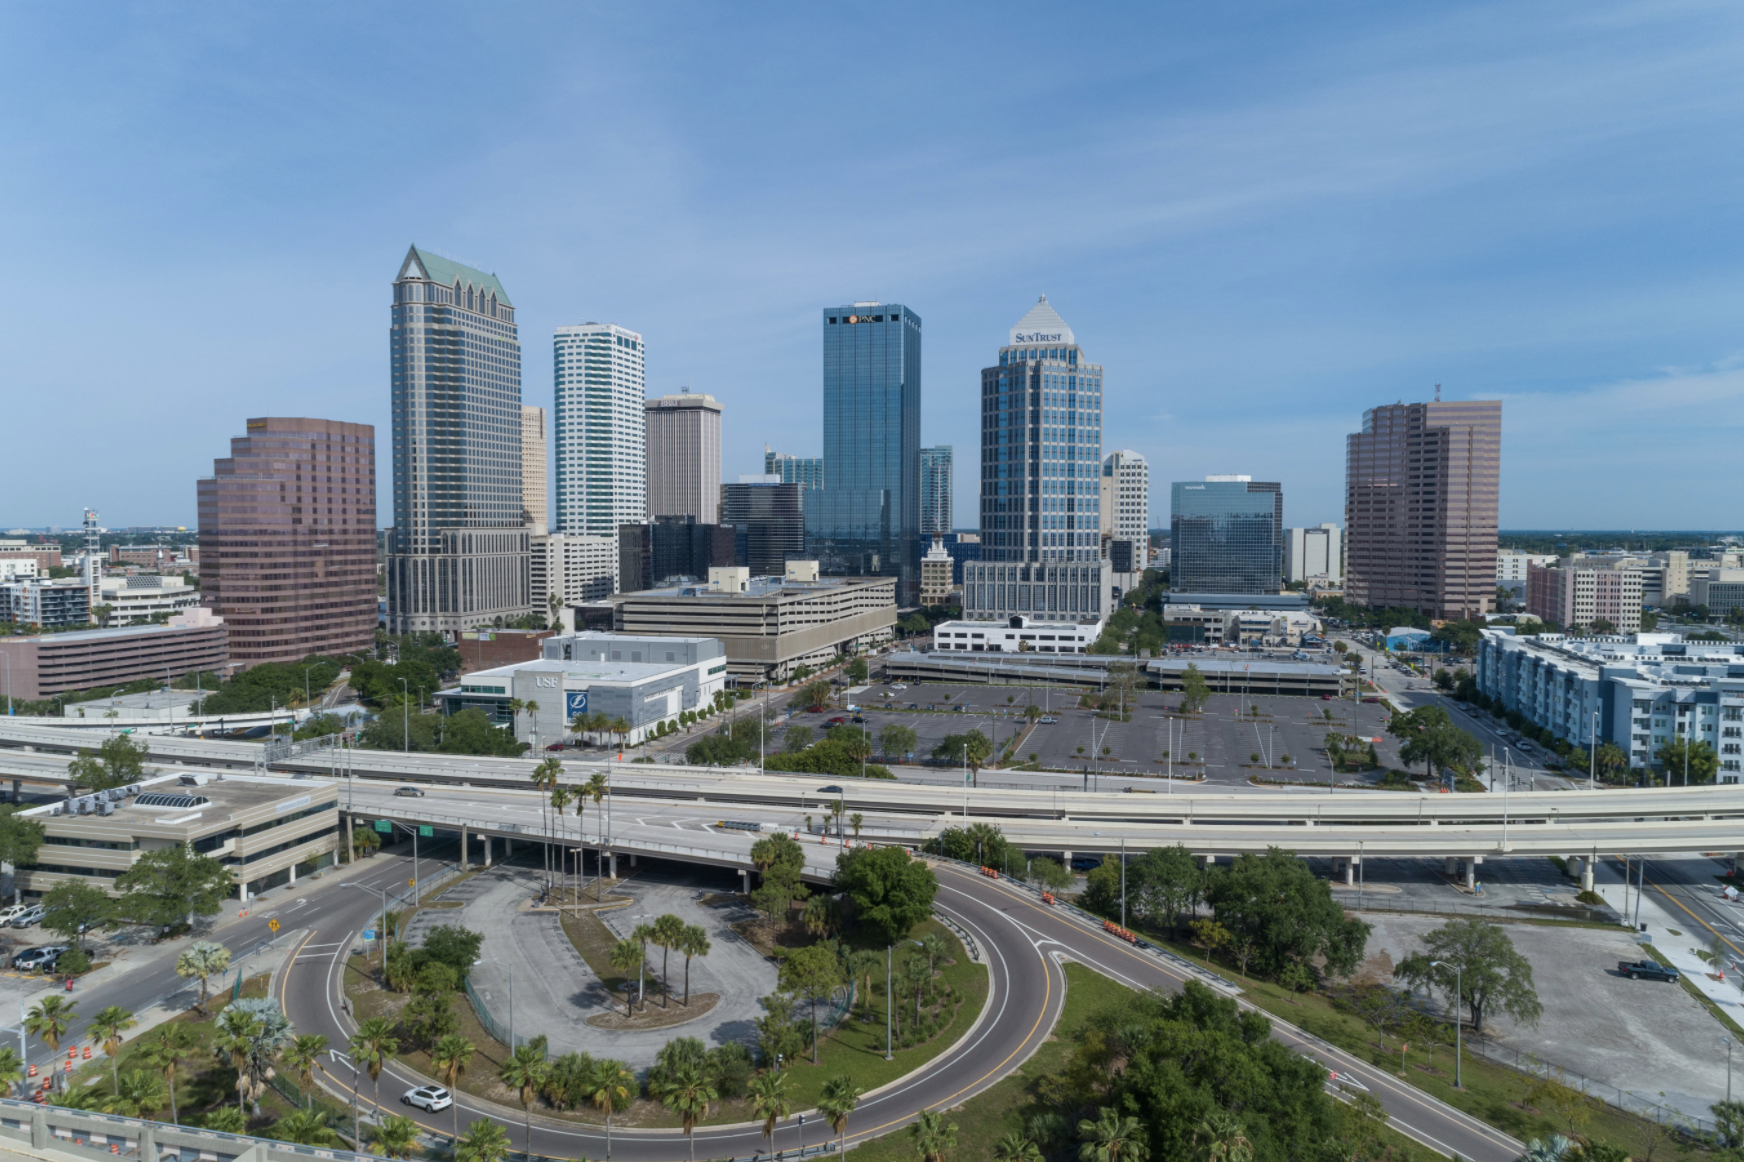 Tampa Hillsborough Expressway Authority Selects Firm for Real